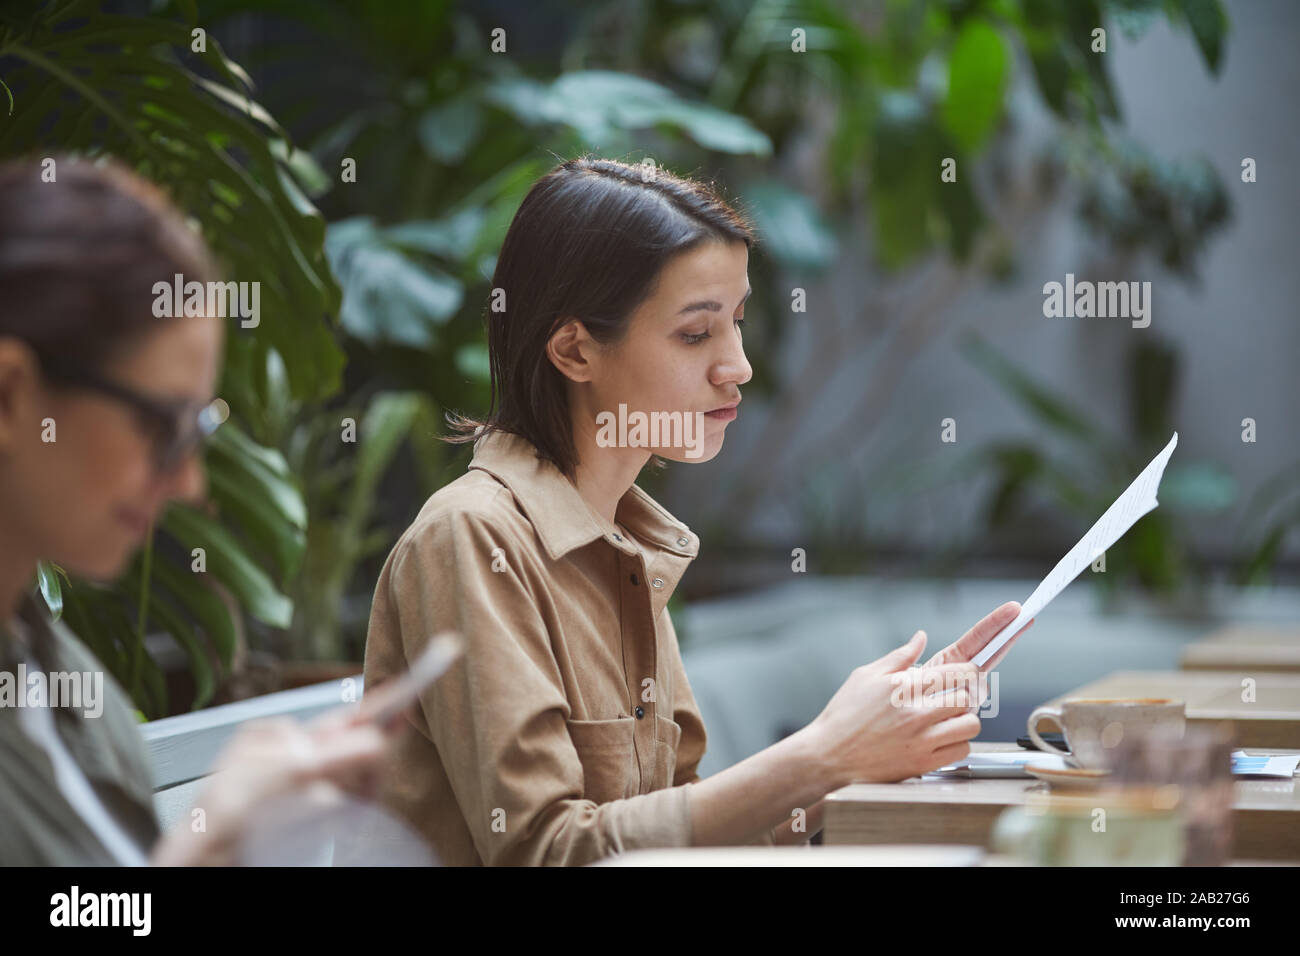 Side view portrait of young businesswoman reading documents while working in outdoor cafe, copy space Stock Photo